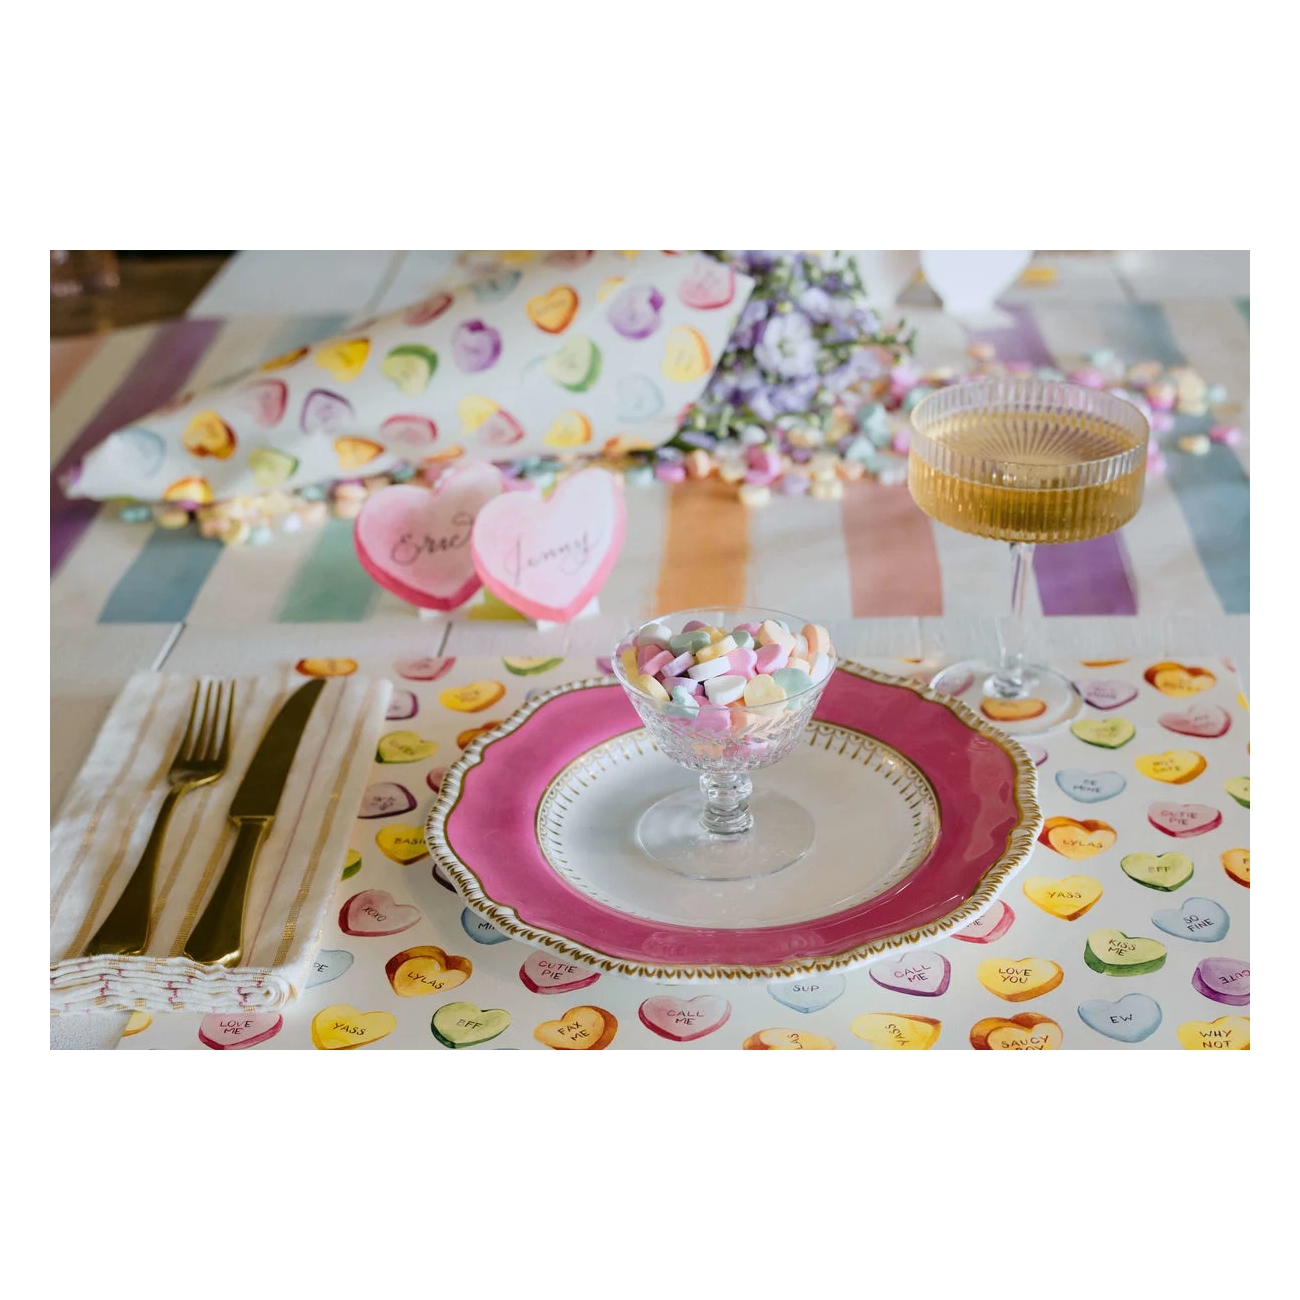 Conversation Hearts Placemat- Pad of 24